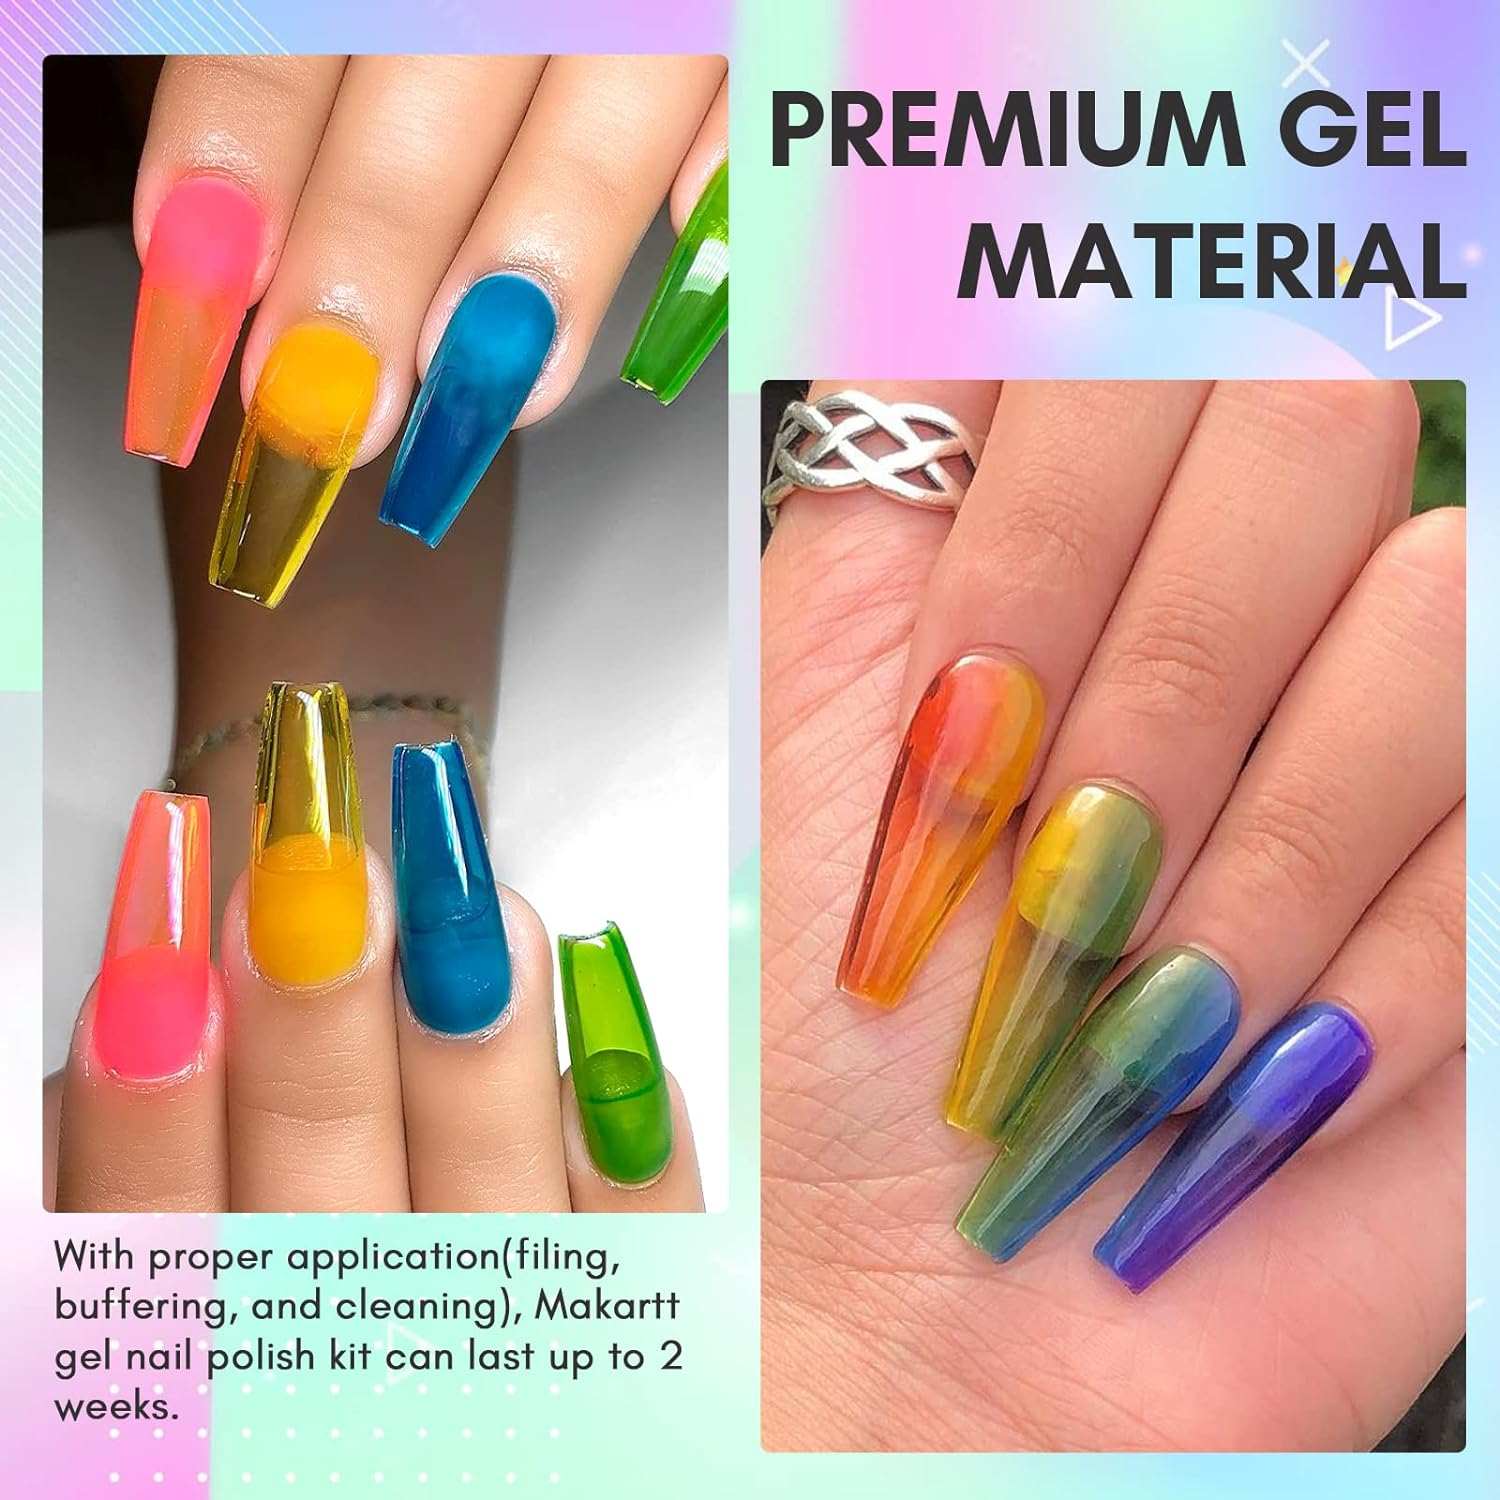 Somewhere Over the Rainbow – Nail Candy Luxury Press-On Nails